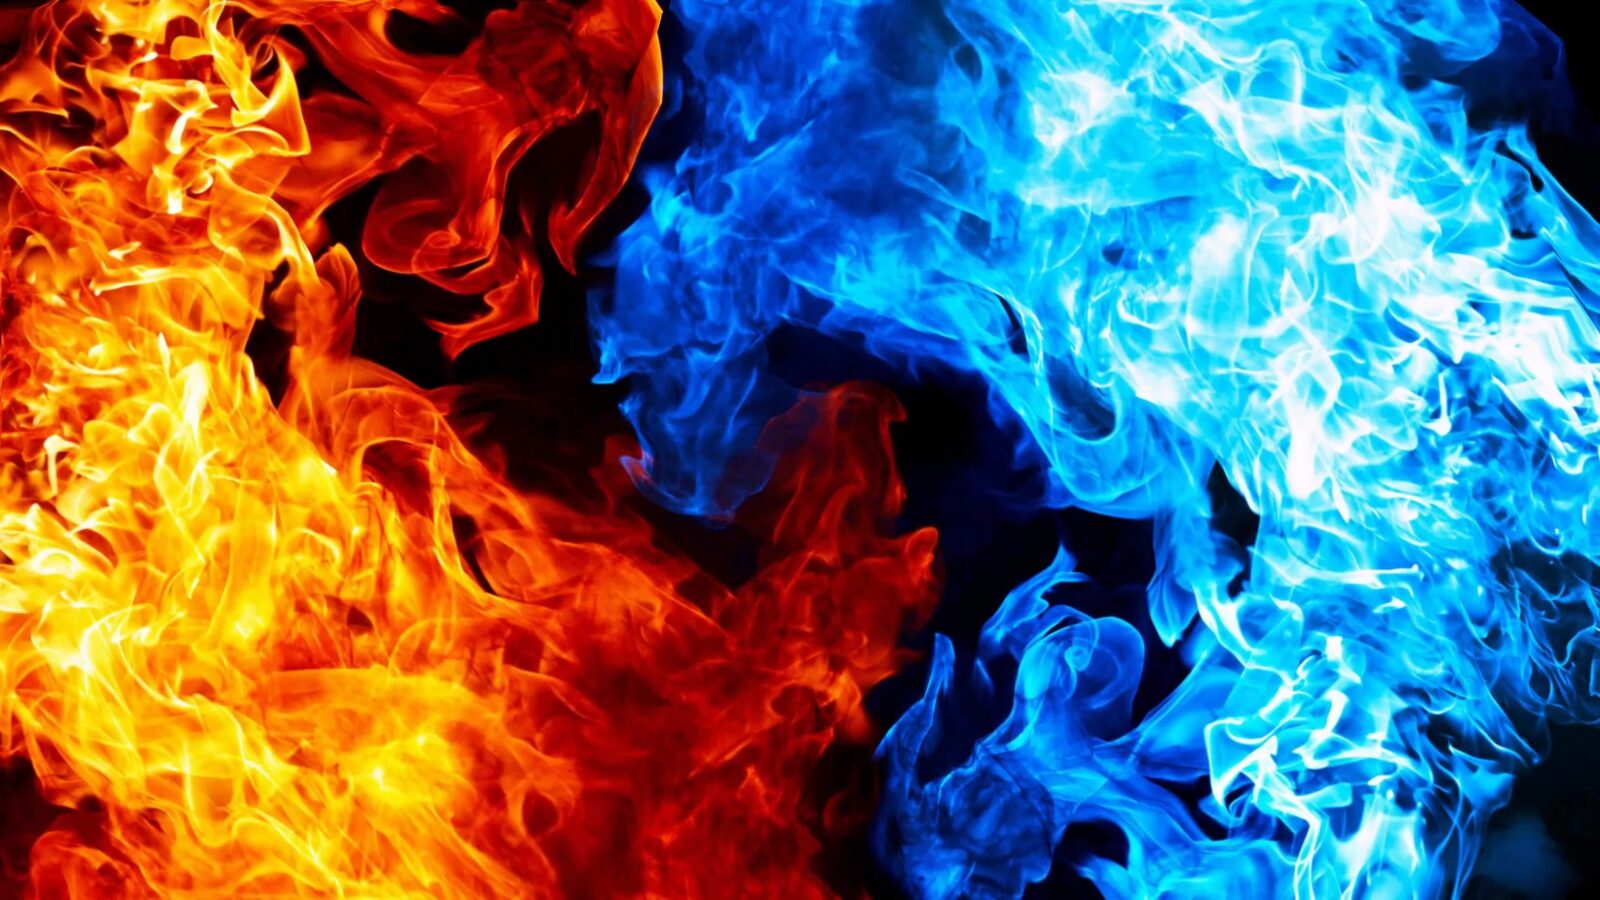 Red Flame Blue Fire 4K Abstract Artwork - Free Live Wallpaper - Live